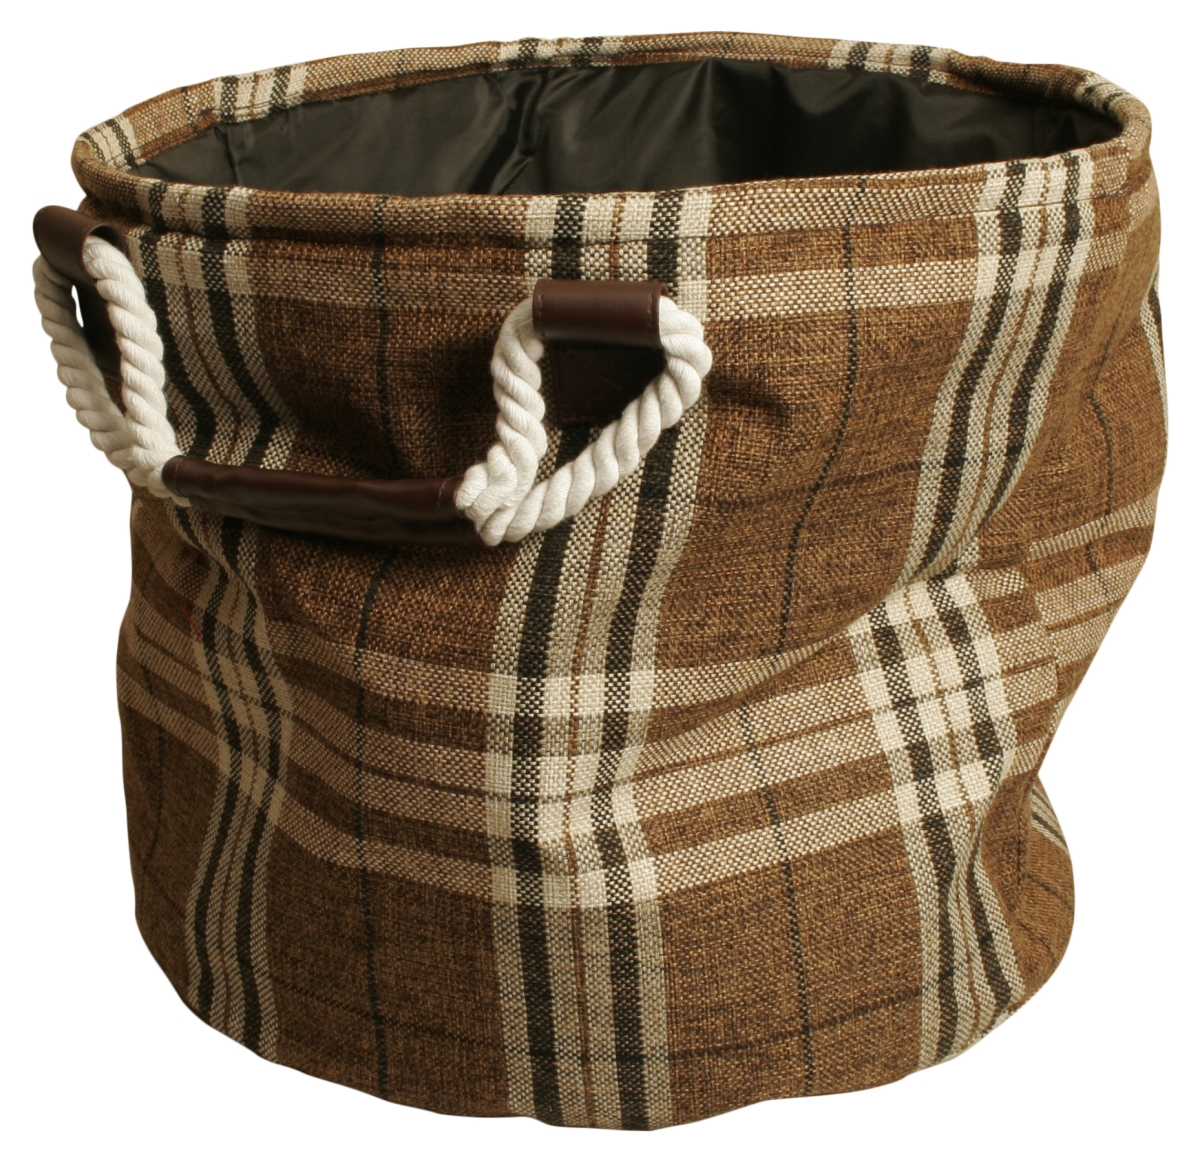 70016 Plaid Collapsible Fabric Tote, Beige